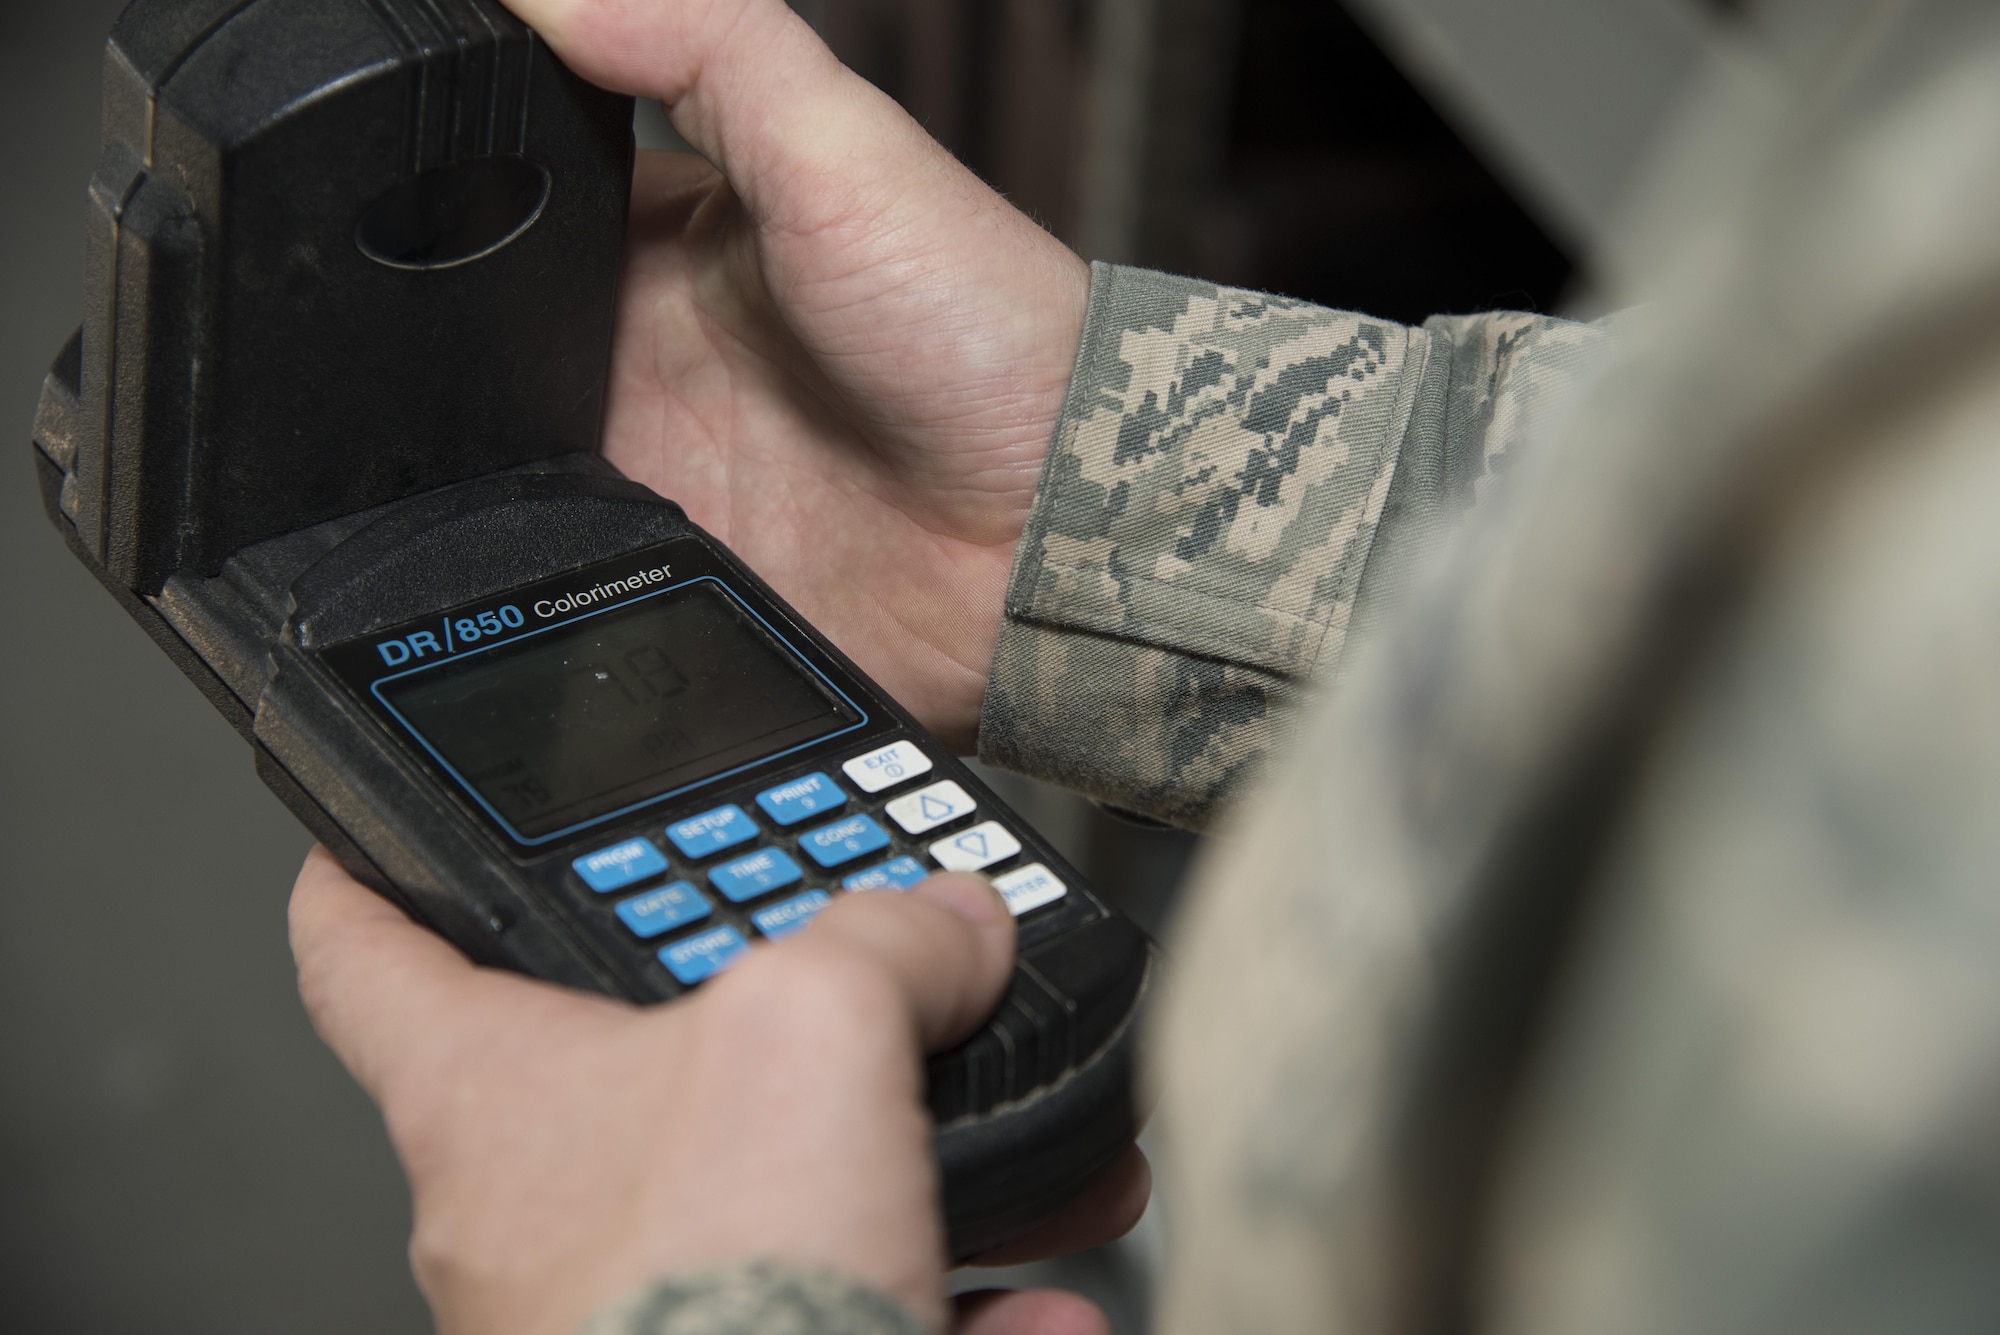 Senior Airman Alexander Delfs, 436th Aerospace Medical Squadron bioenvironmental engineering journeyman, examines water chemistry test results on a colorimeter Nov. 16, 2016, at an aircraft watering point on Dover Air Force Base, Del. Water testers are able to monitor multiple chemical concentrations with a colorimeter, including pH, chlorine and fluoride. (U.S. Air Force photo by Senior Airman Aaron J. Jenne)